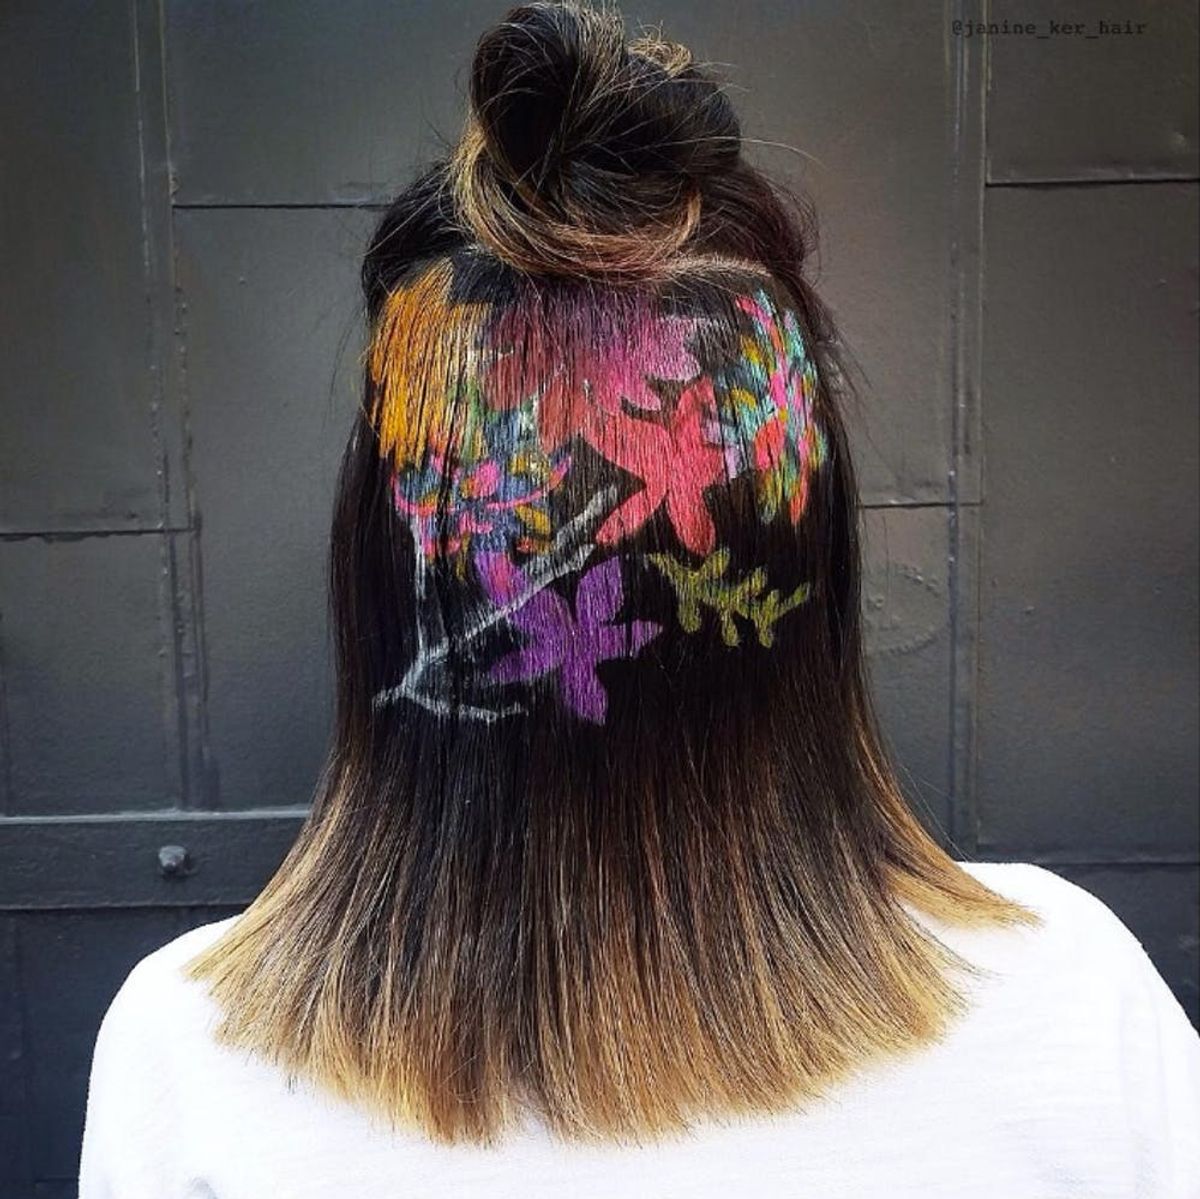 Hair Stenciling Is the Gorgeous Music Festival Hair Hack Everyone Will Be Trying